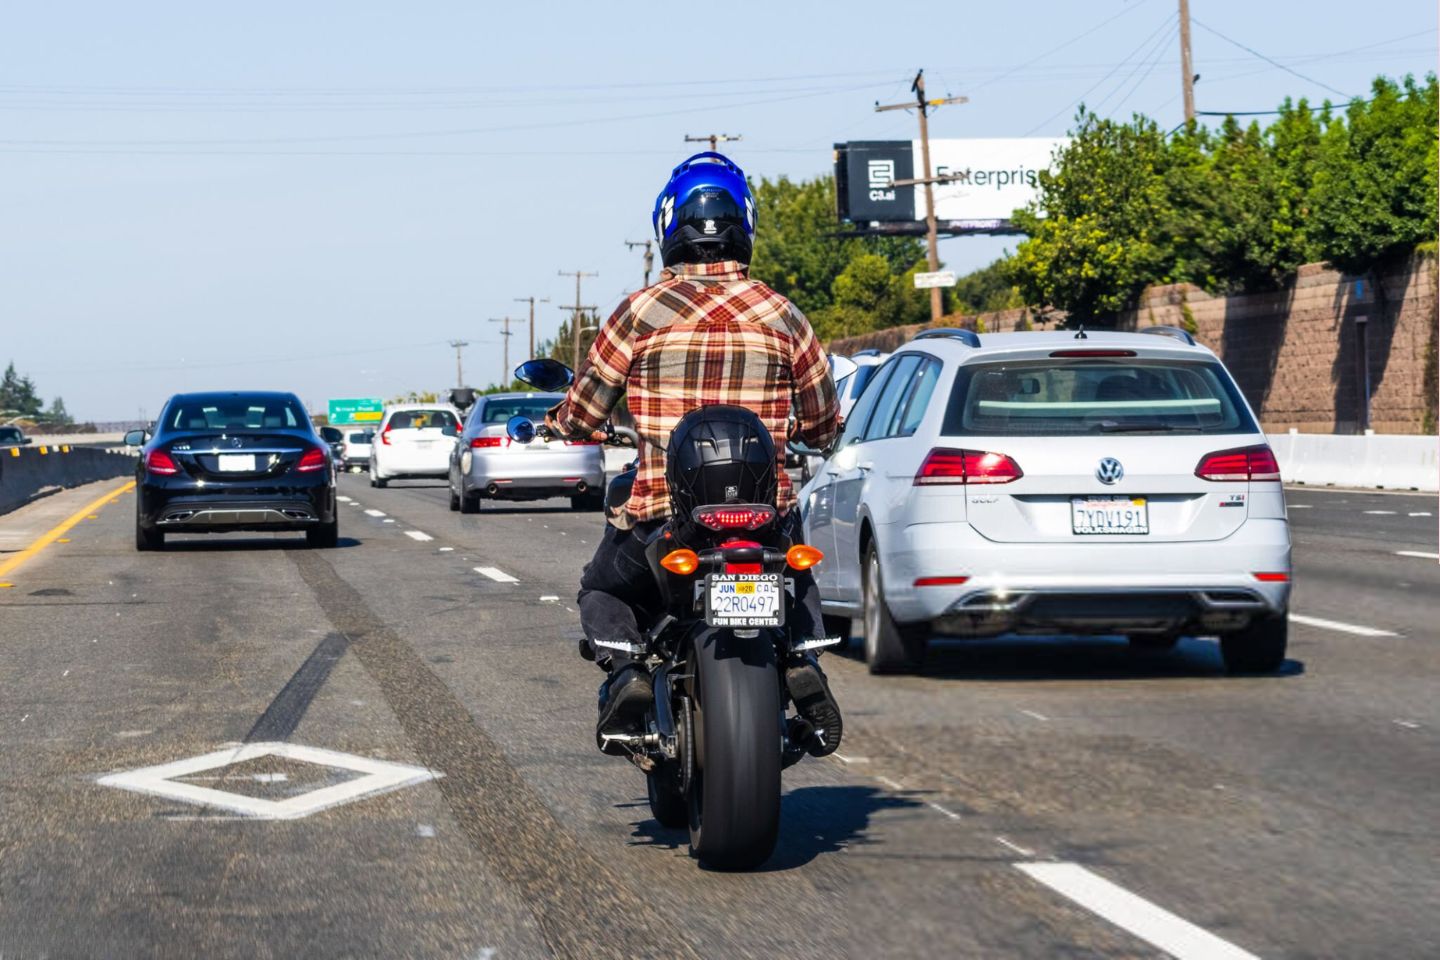 Key California Motorcycle Laws for Safer Roads